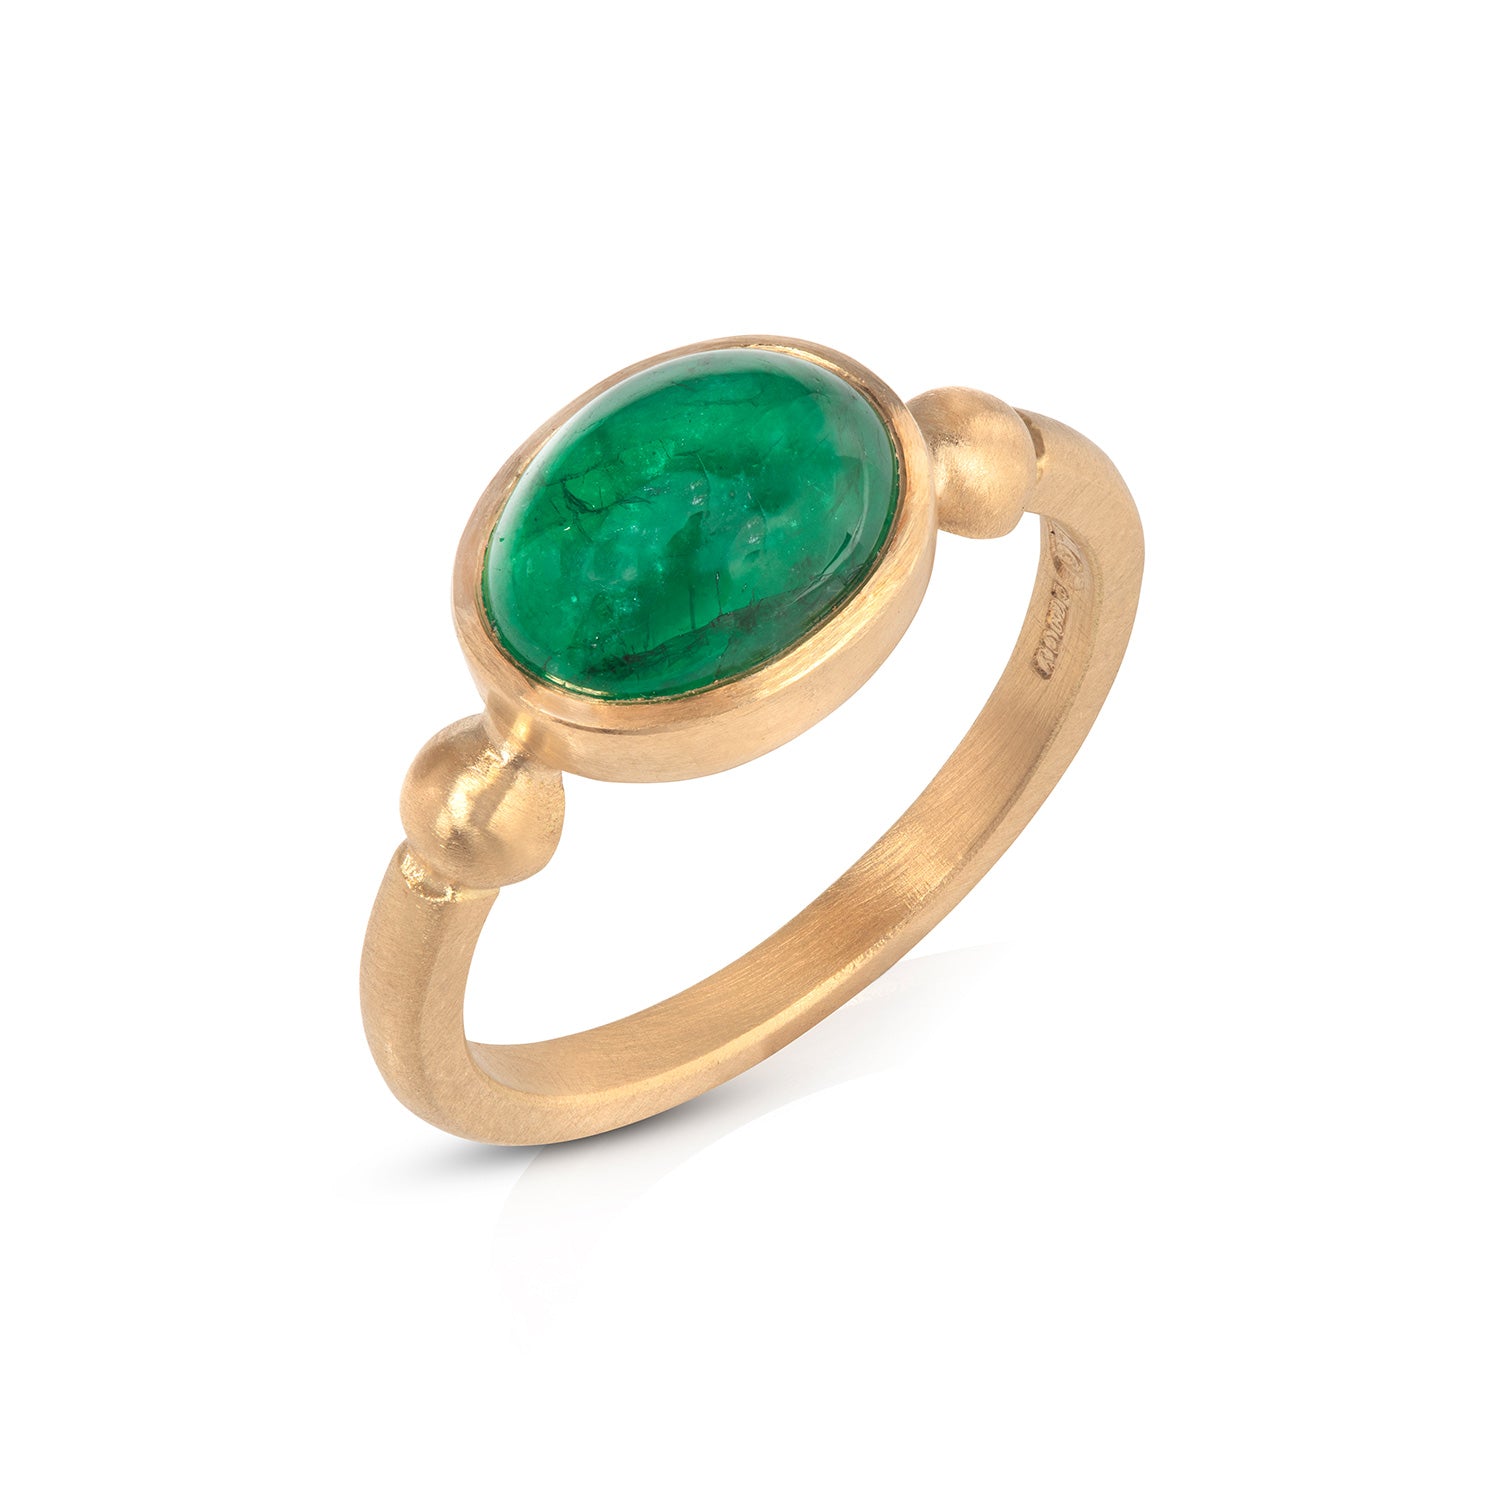 Emerald cabochon ring on white background